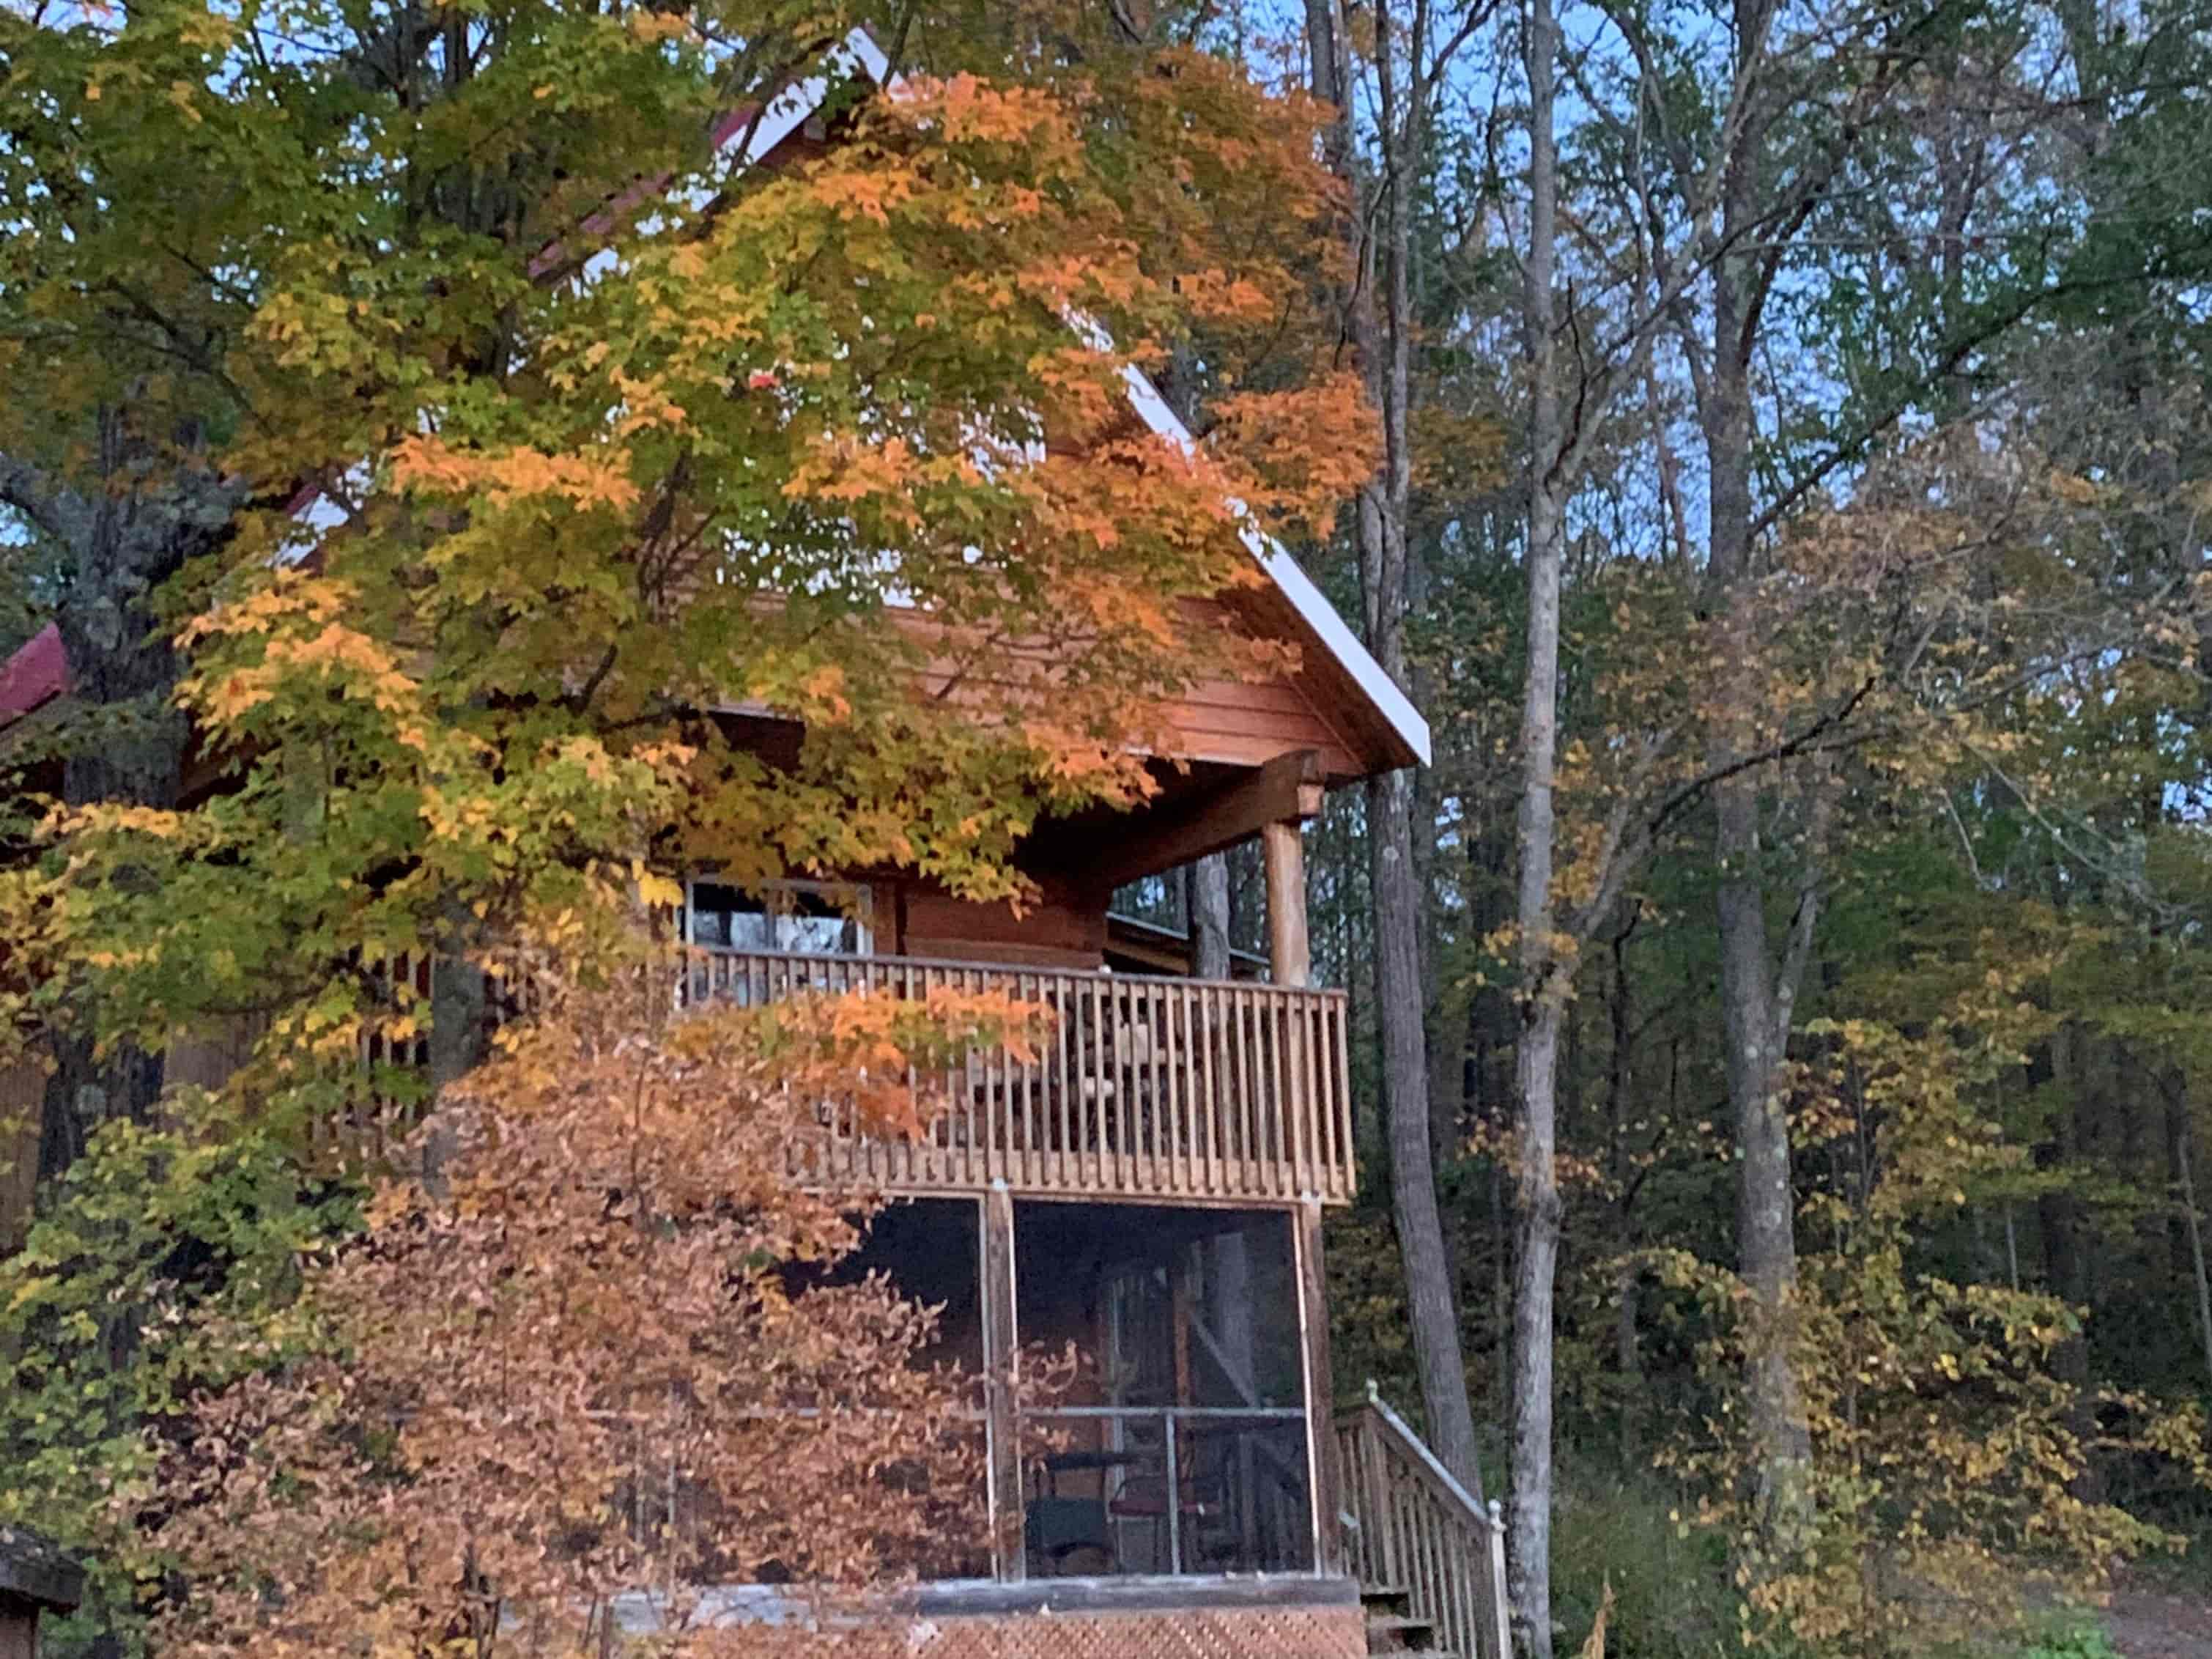 The log cabin hidden in the fall colours.